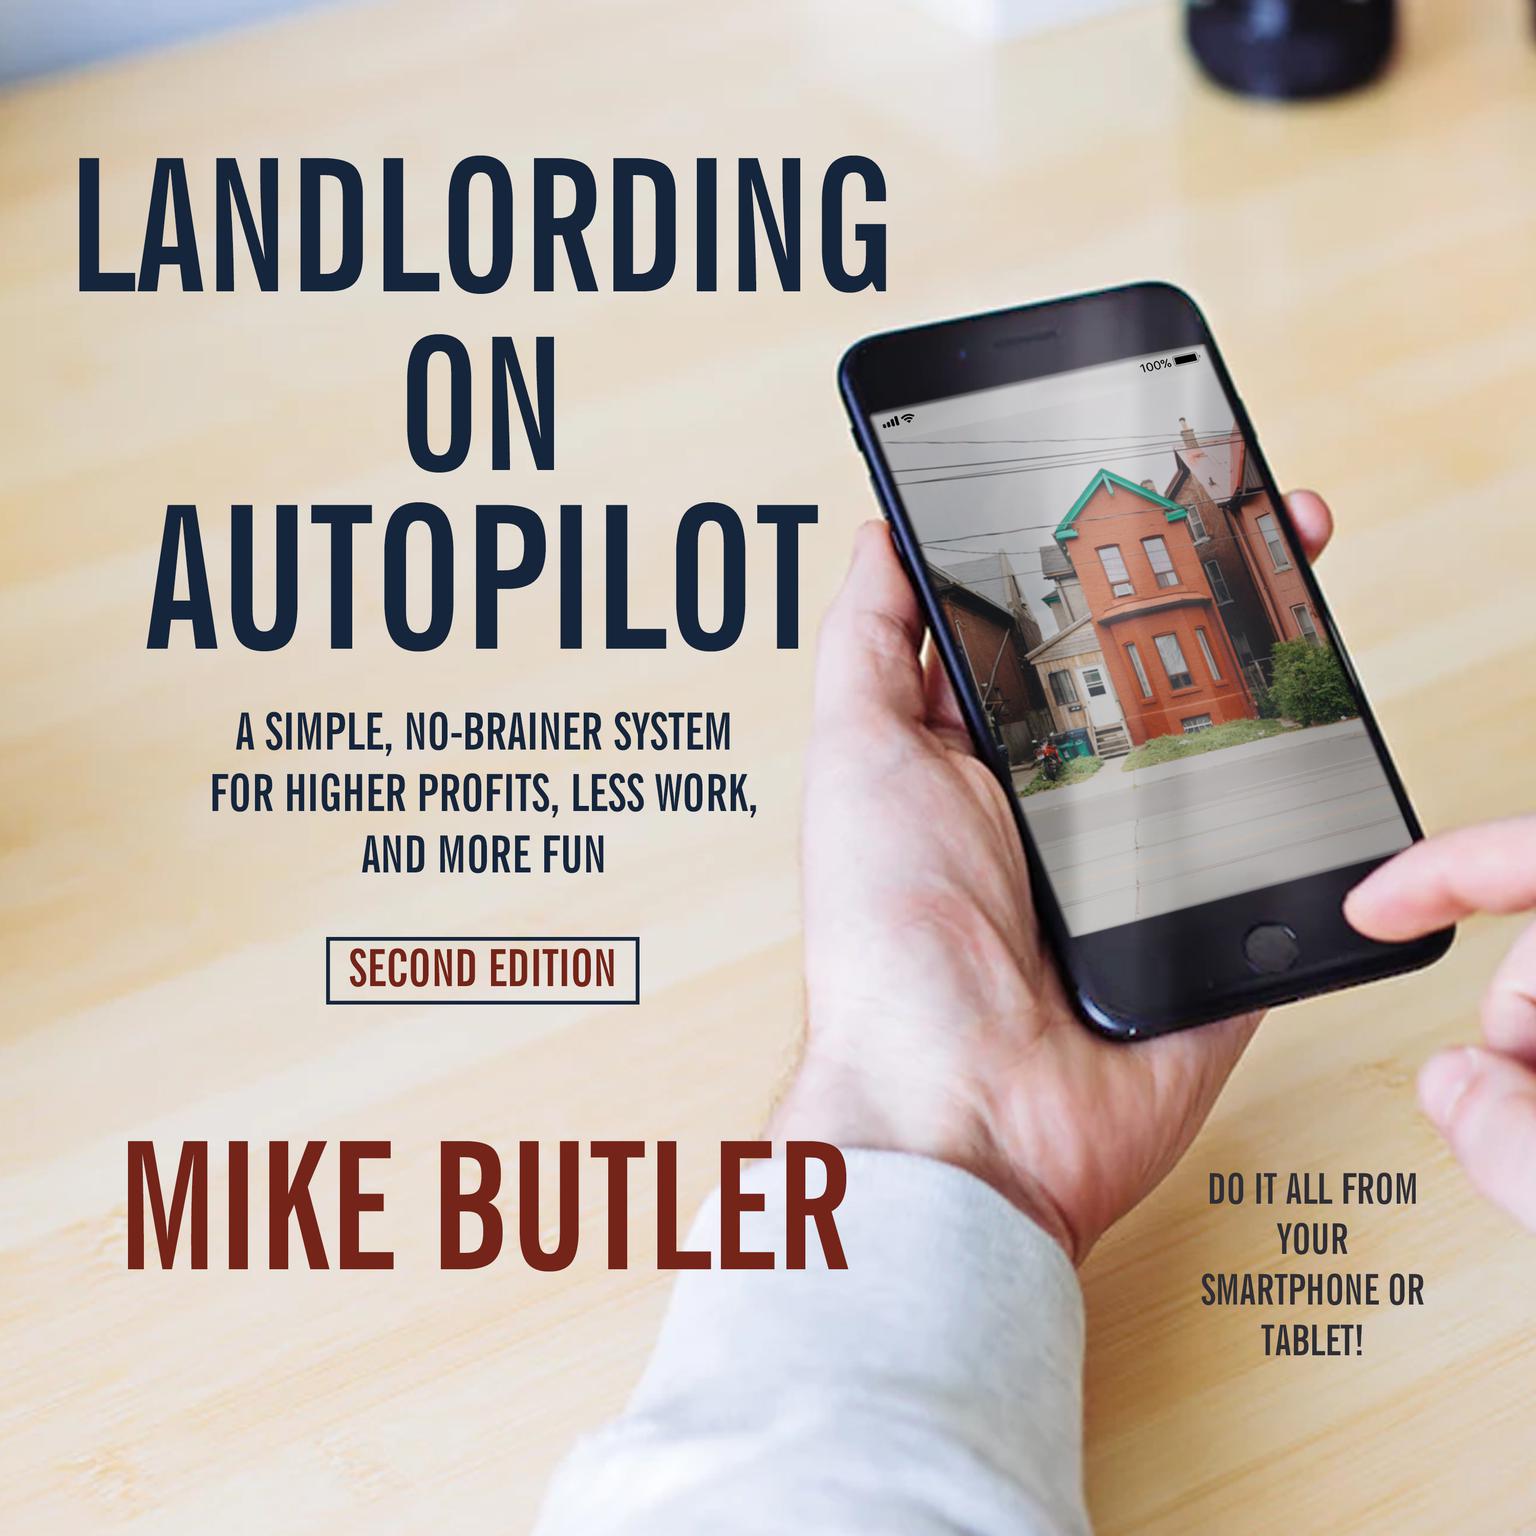 Landlording on AutoPilot: A Simple, No-Brainer System for Higher Profits, Less Work and More Fun (Do It All from Your Smartphone or Tablet!), 2nd Edition Audiobook, by Mike Butler